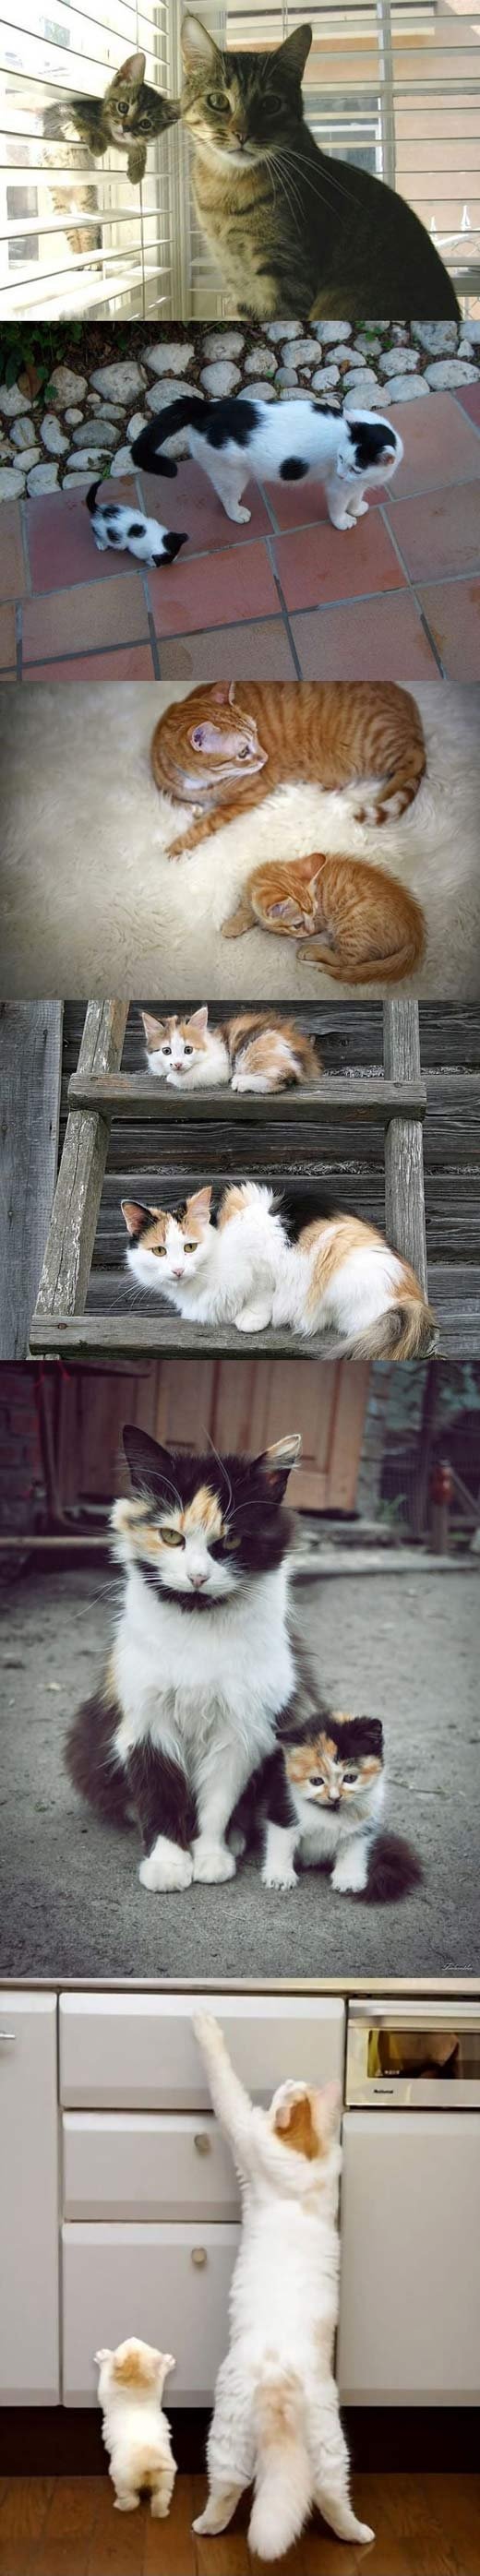 Cats and their kittens.